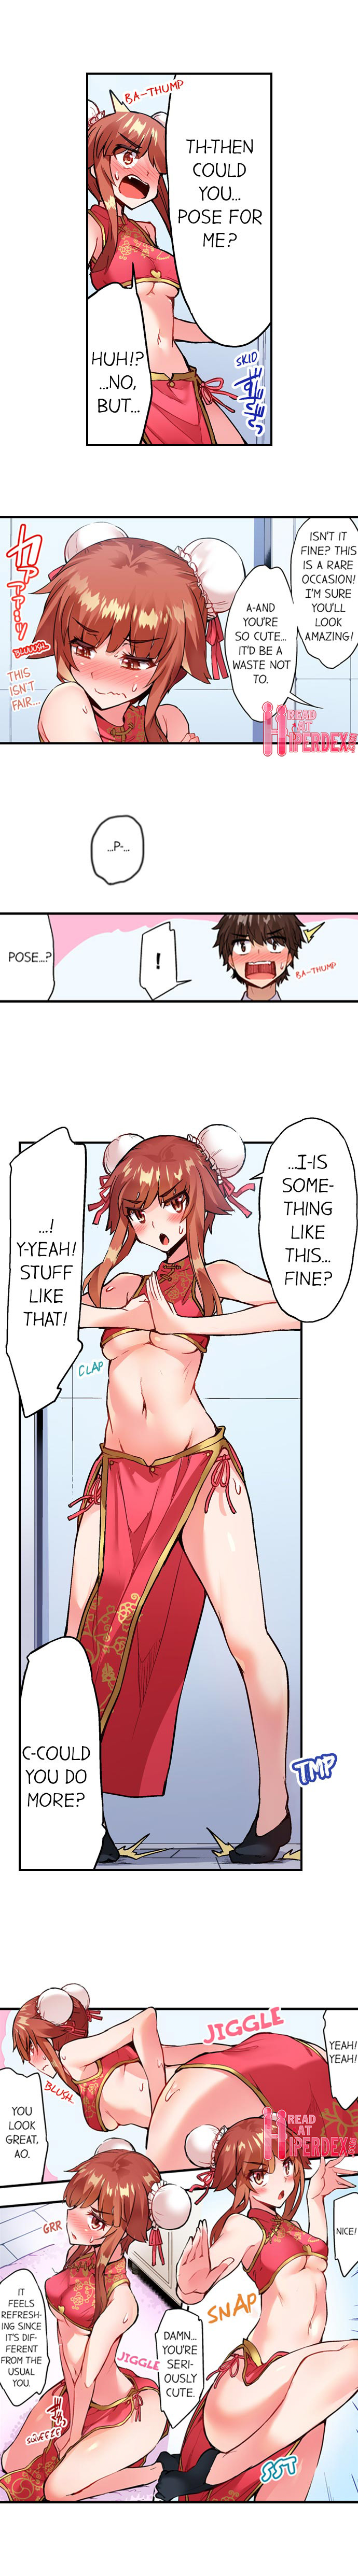 Traditional Job of Washing Girls’ Body - Chapter 112 Page 8